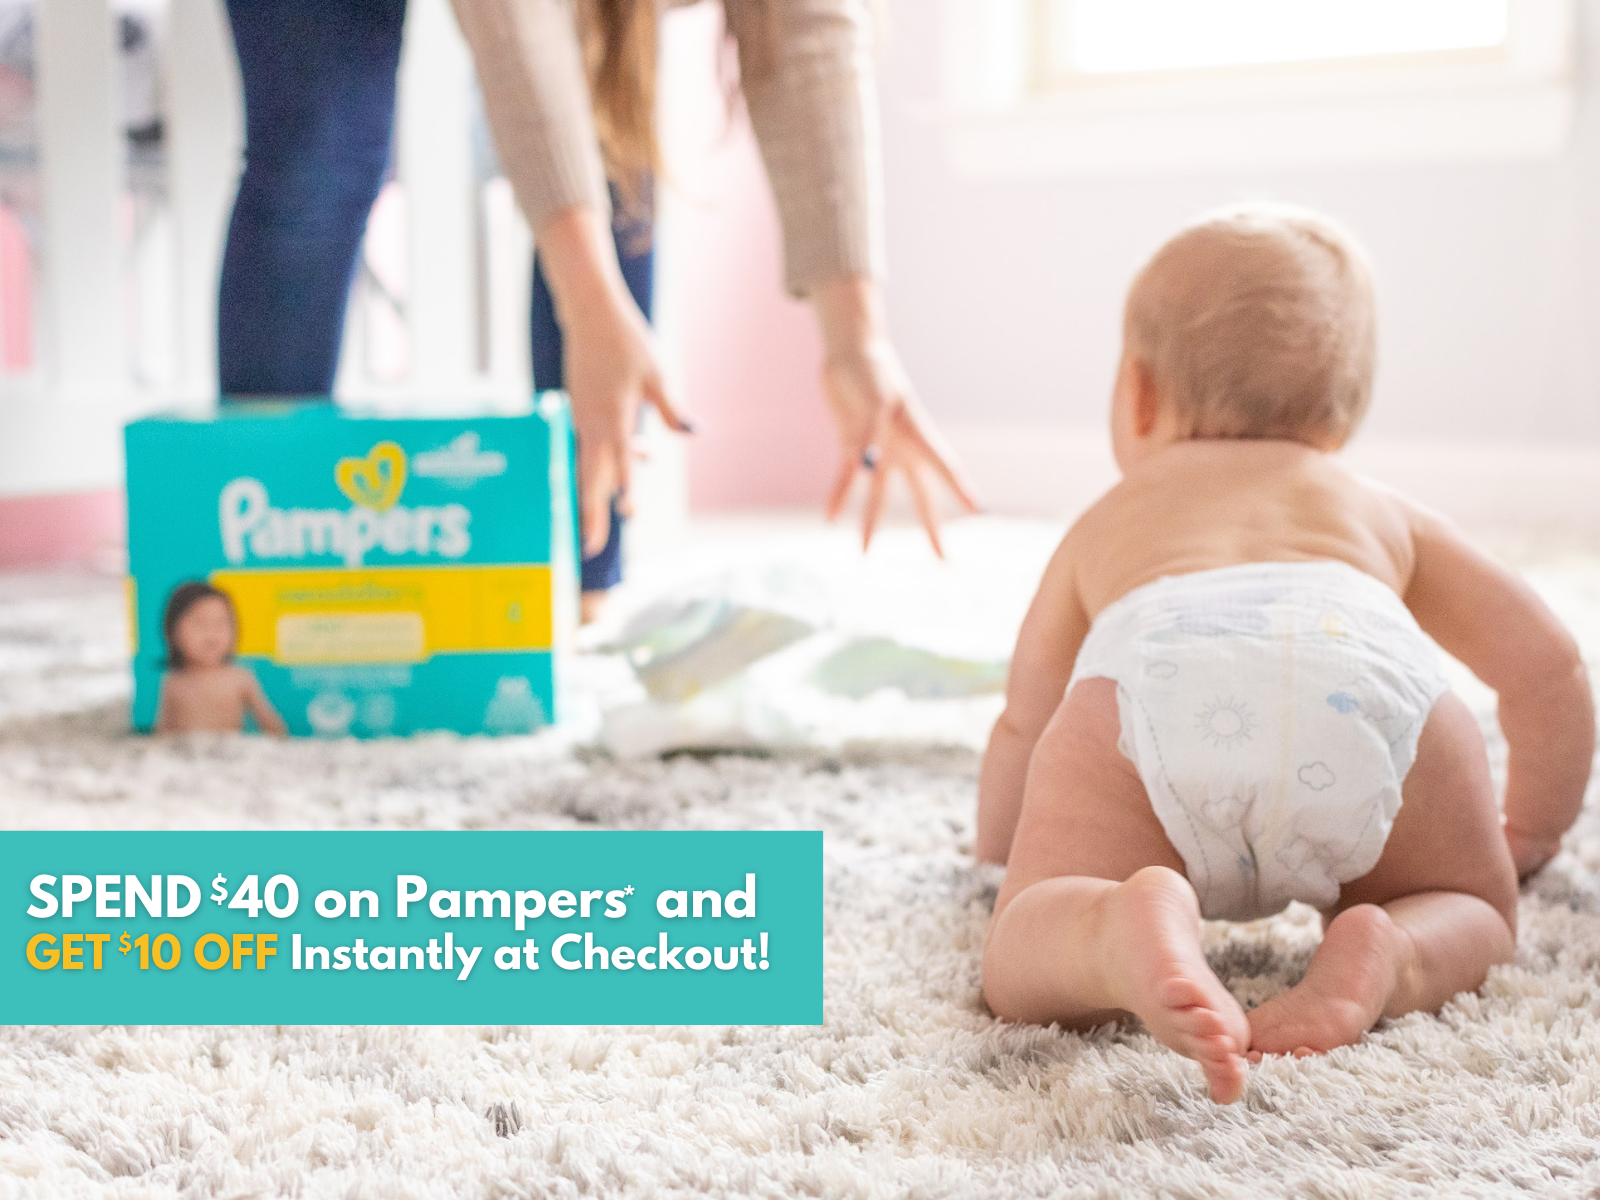 Still Time To Save! Spend $40 On Pampers* And Get $10 Off Instantly At Checkout At Publix